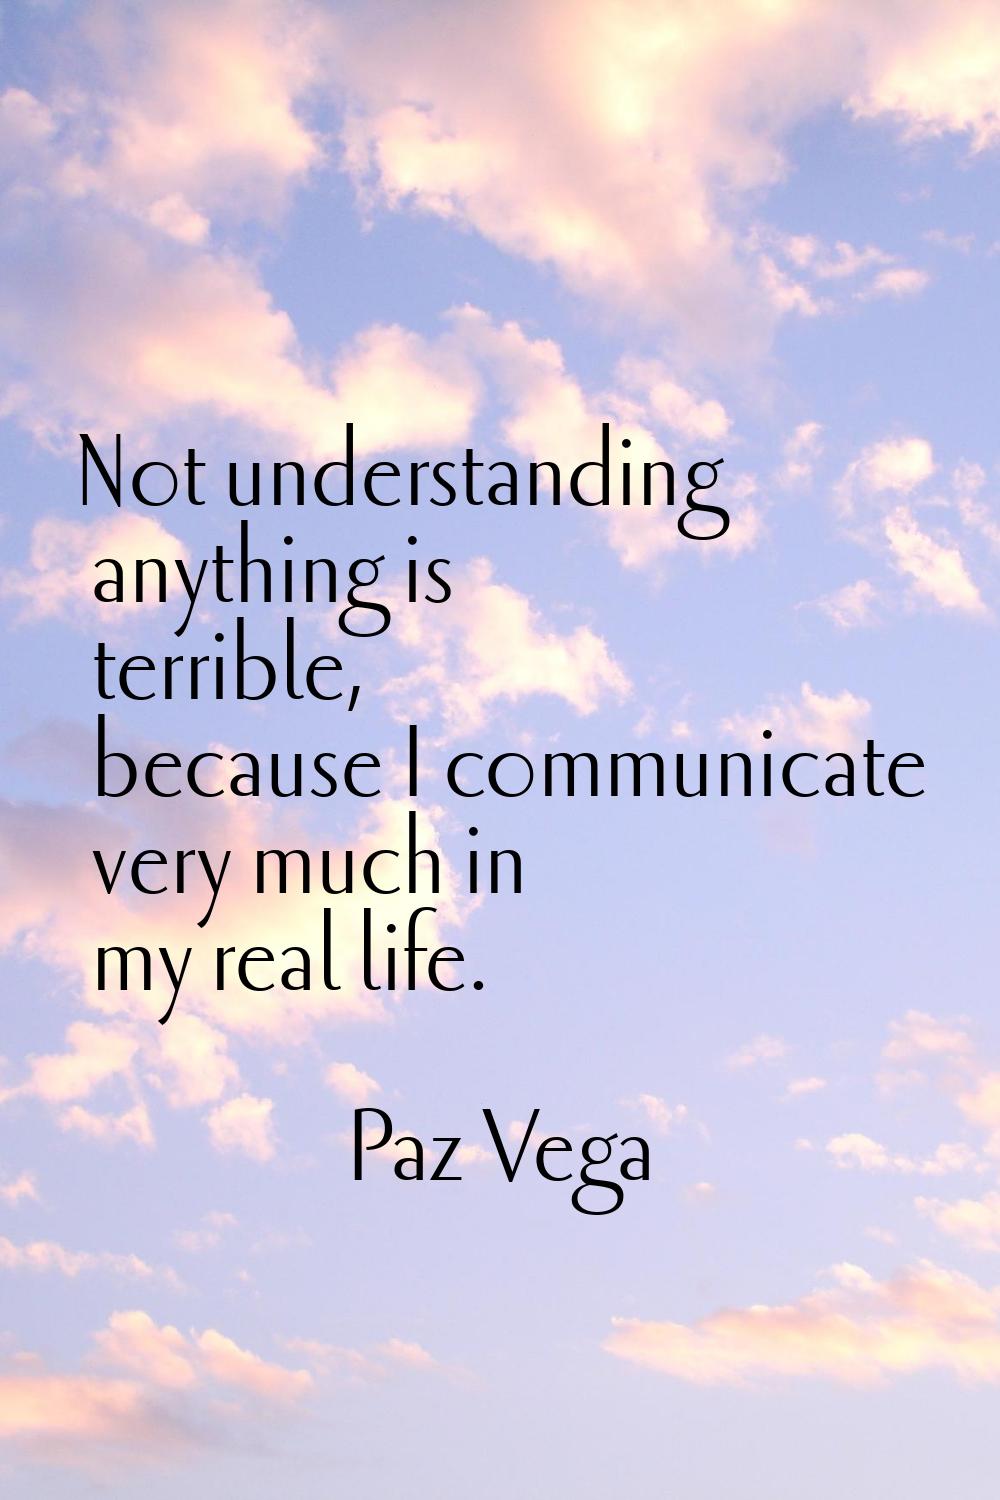 Not understanding anything is terrible, because I communicate very much in my real life.